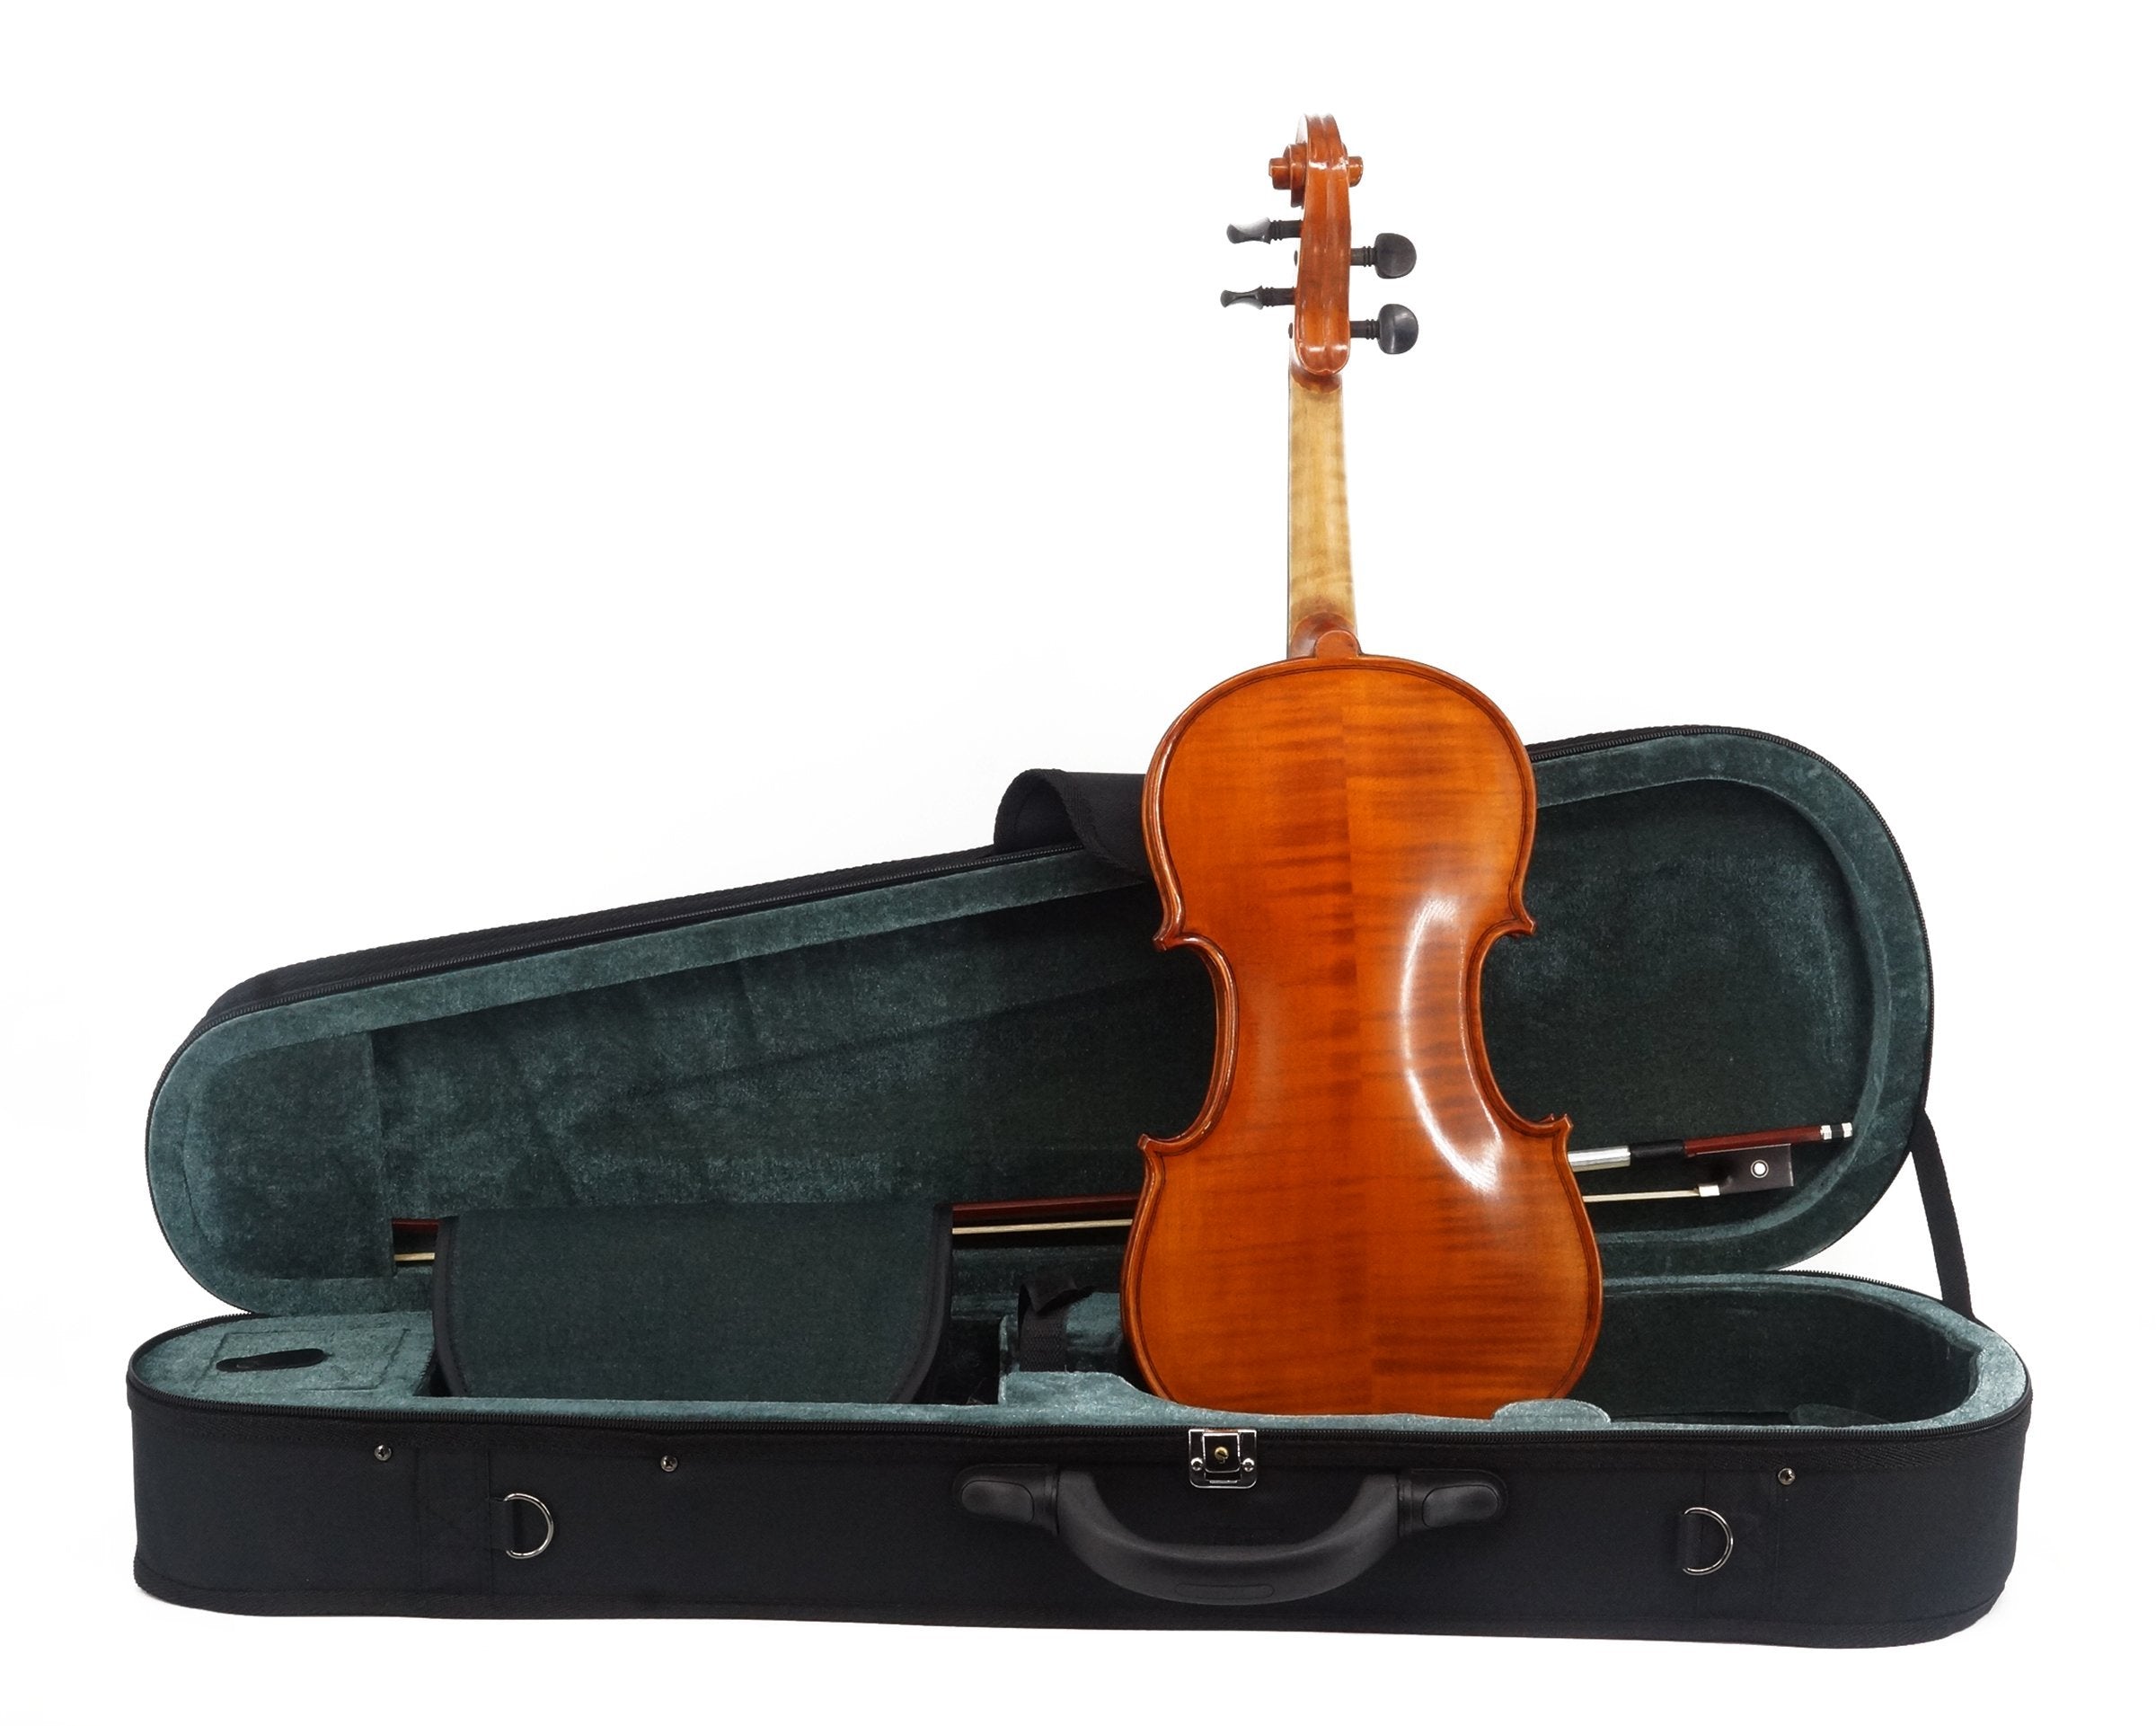 Kato 500 Violin Outfit including case, bow and violin from the back - All Sizes